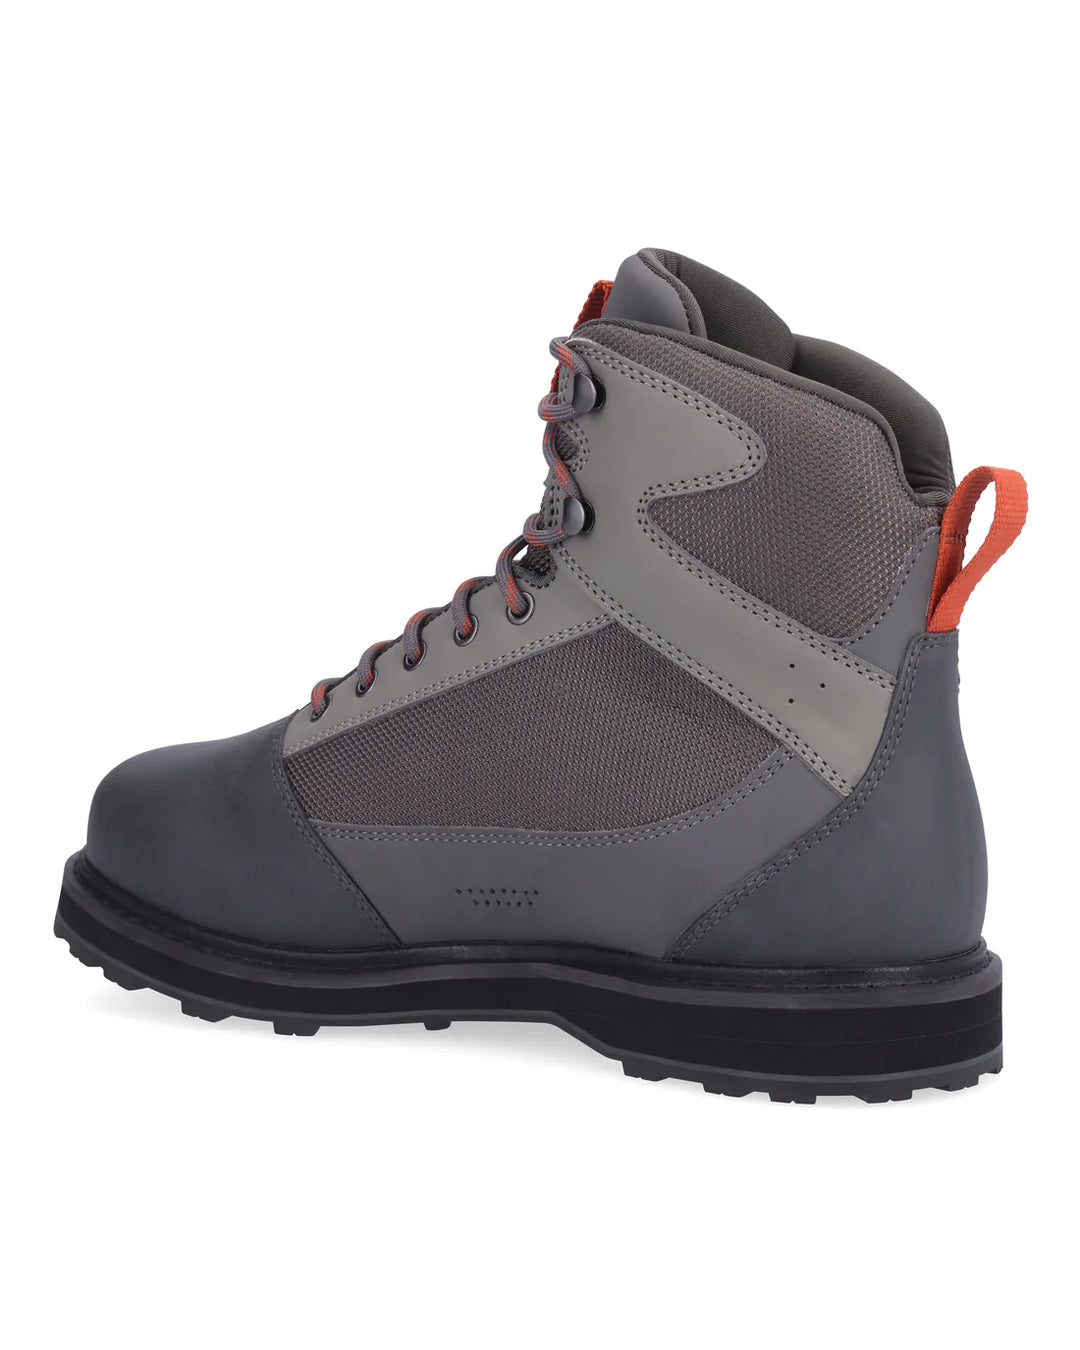 Simms - Tributary Wading Boot - Rubber Soles - Basalt